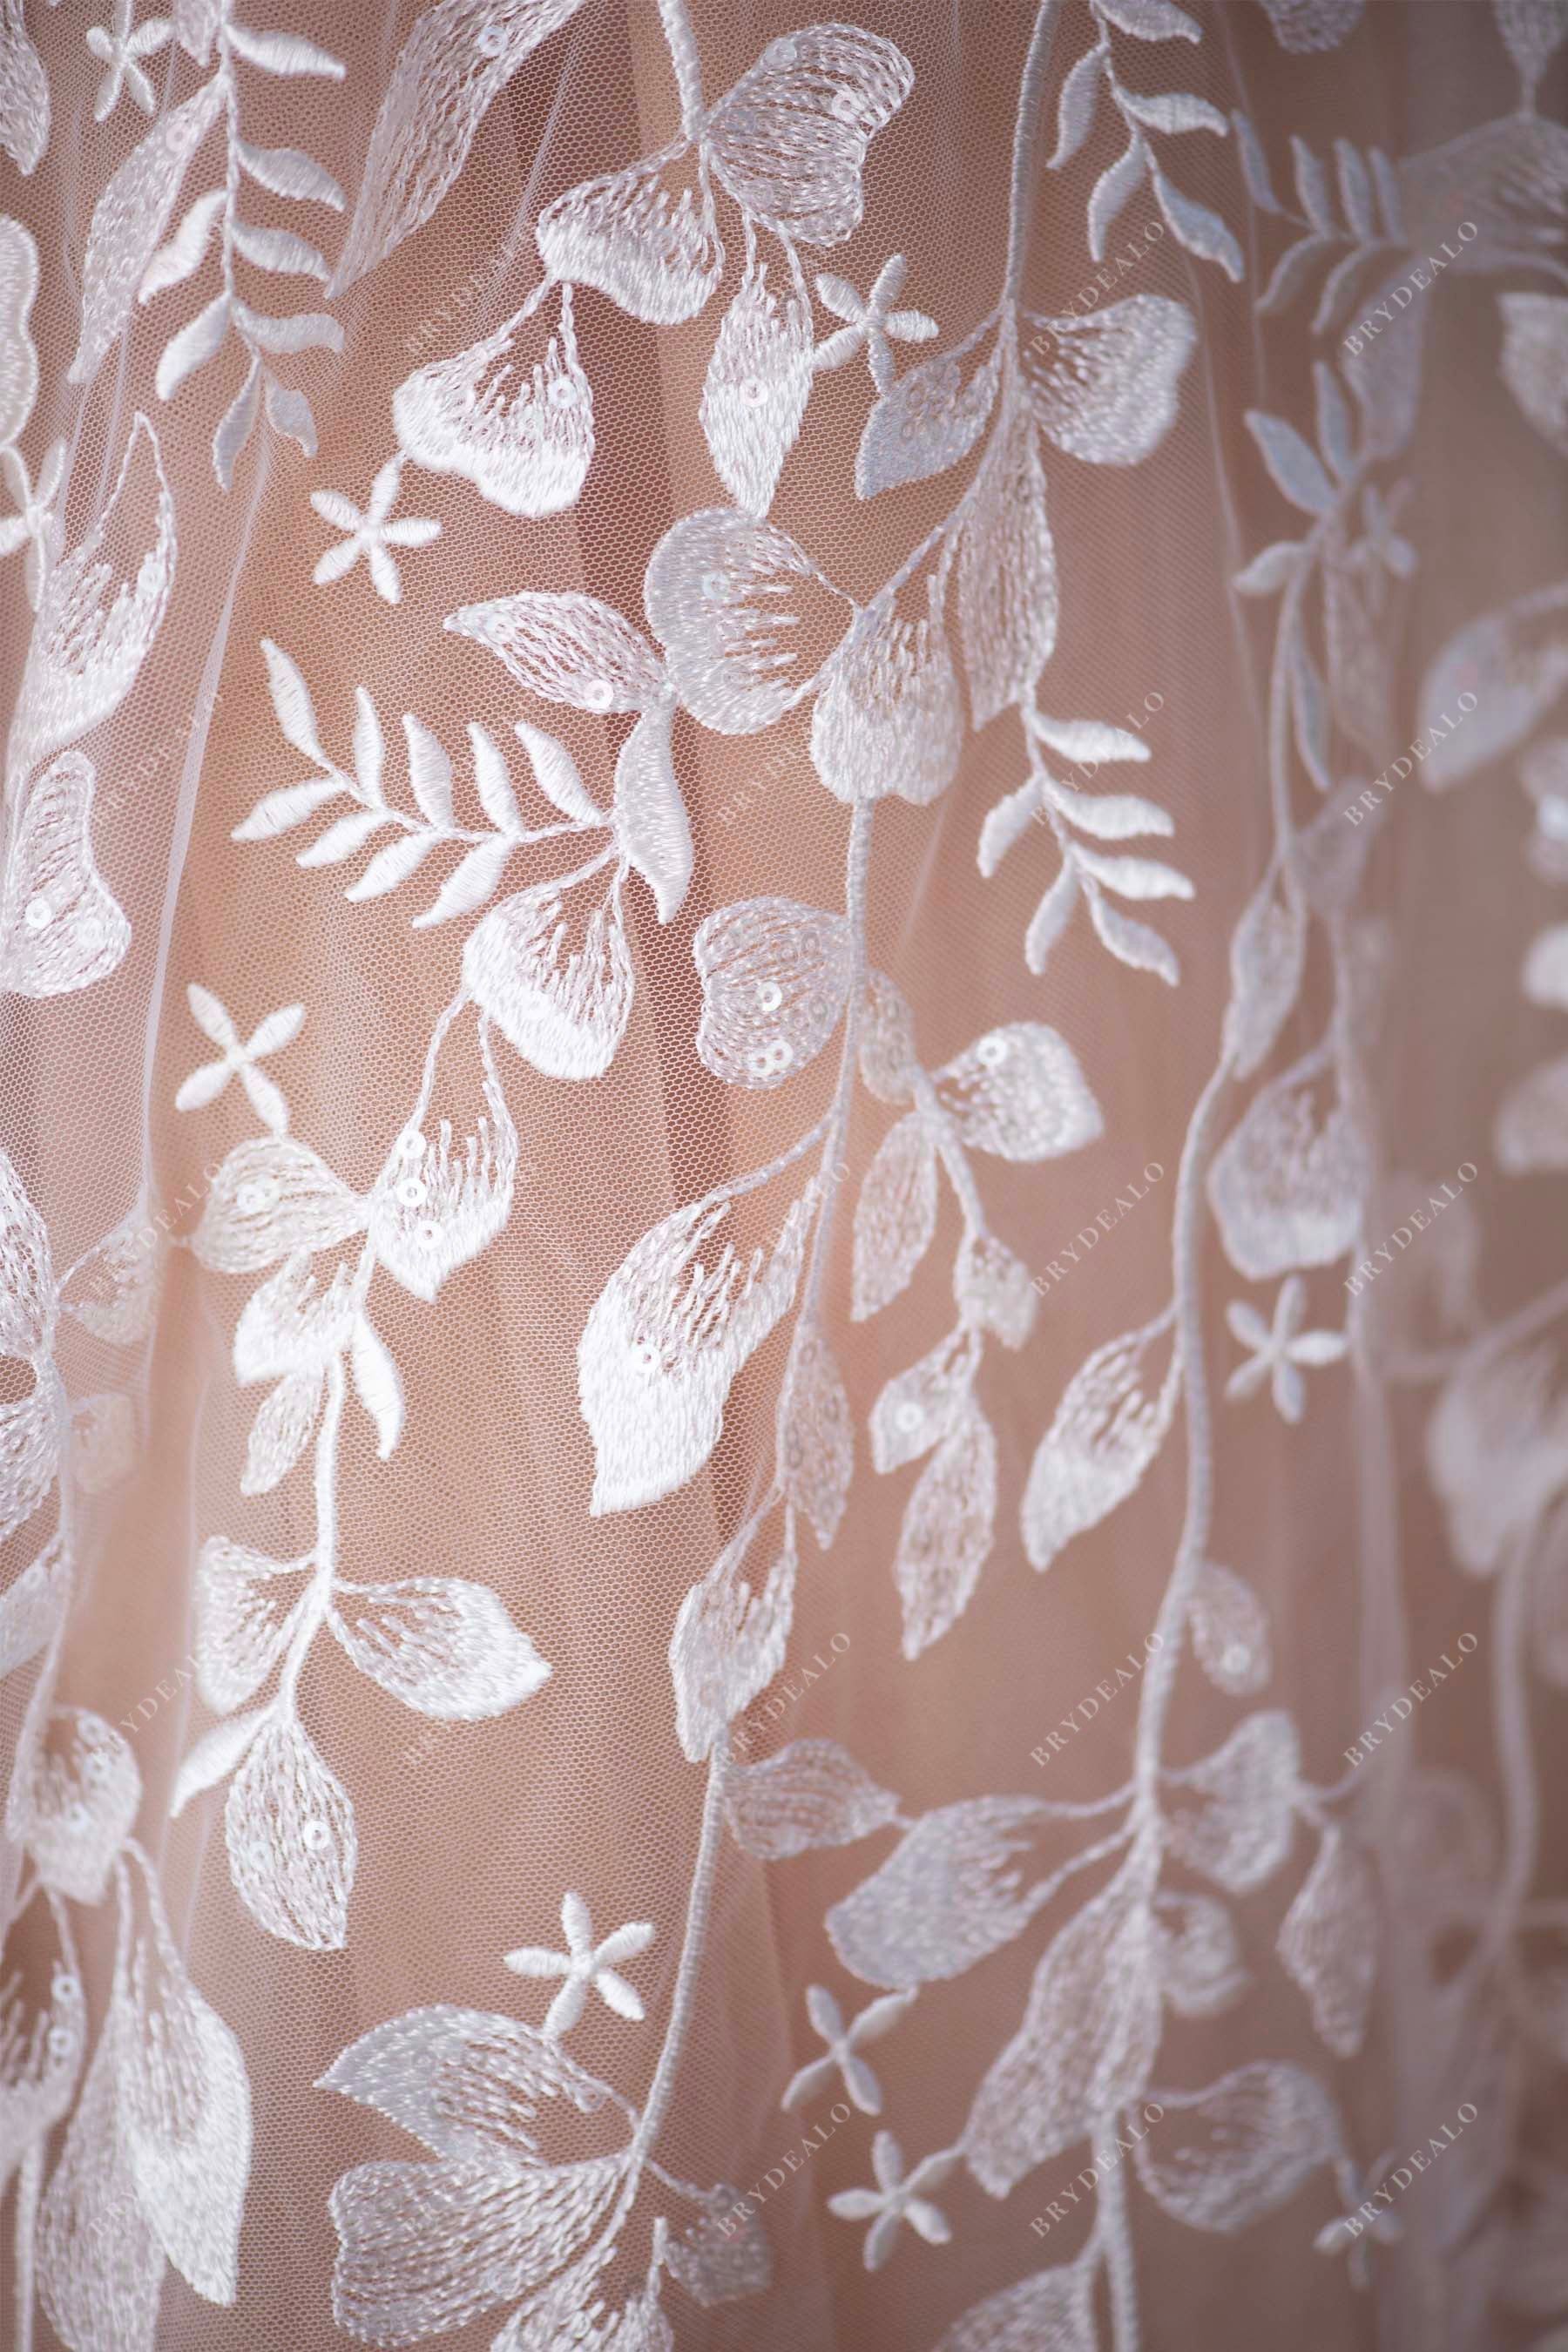 shimmery sequined flower leaf lace fabric for romantic dresses